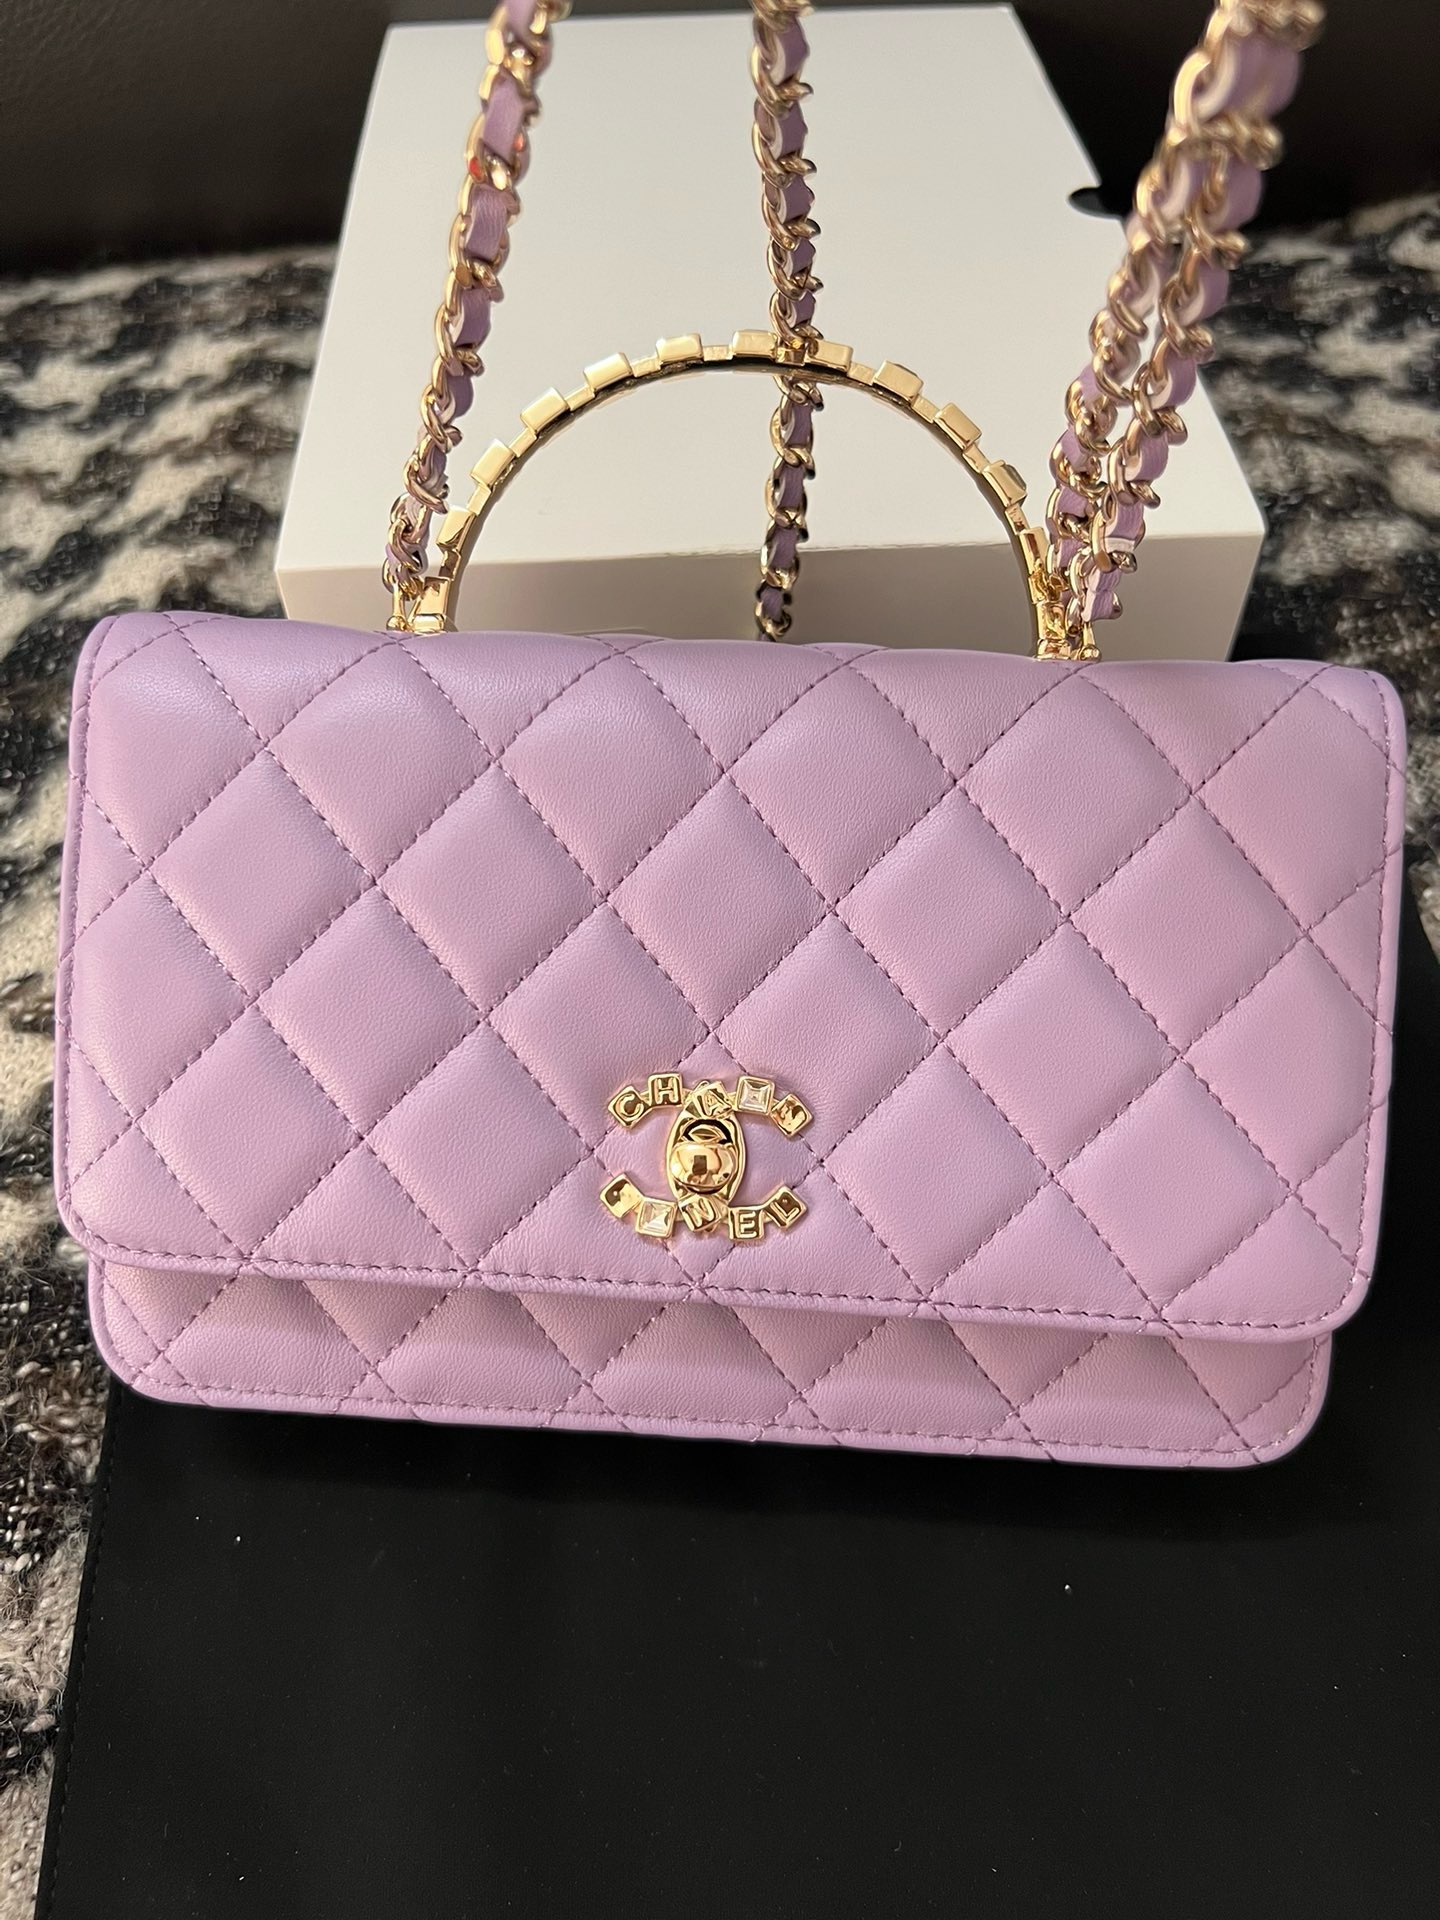 CHANEL FLAP PHONE HOLDER WITH CHAIN AB3566 Light purple